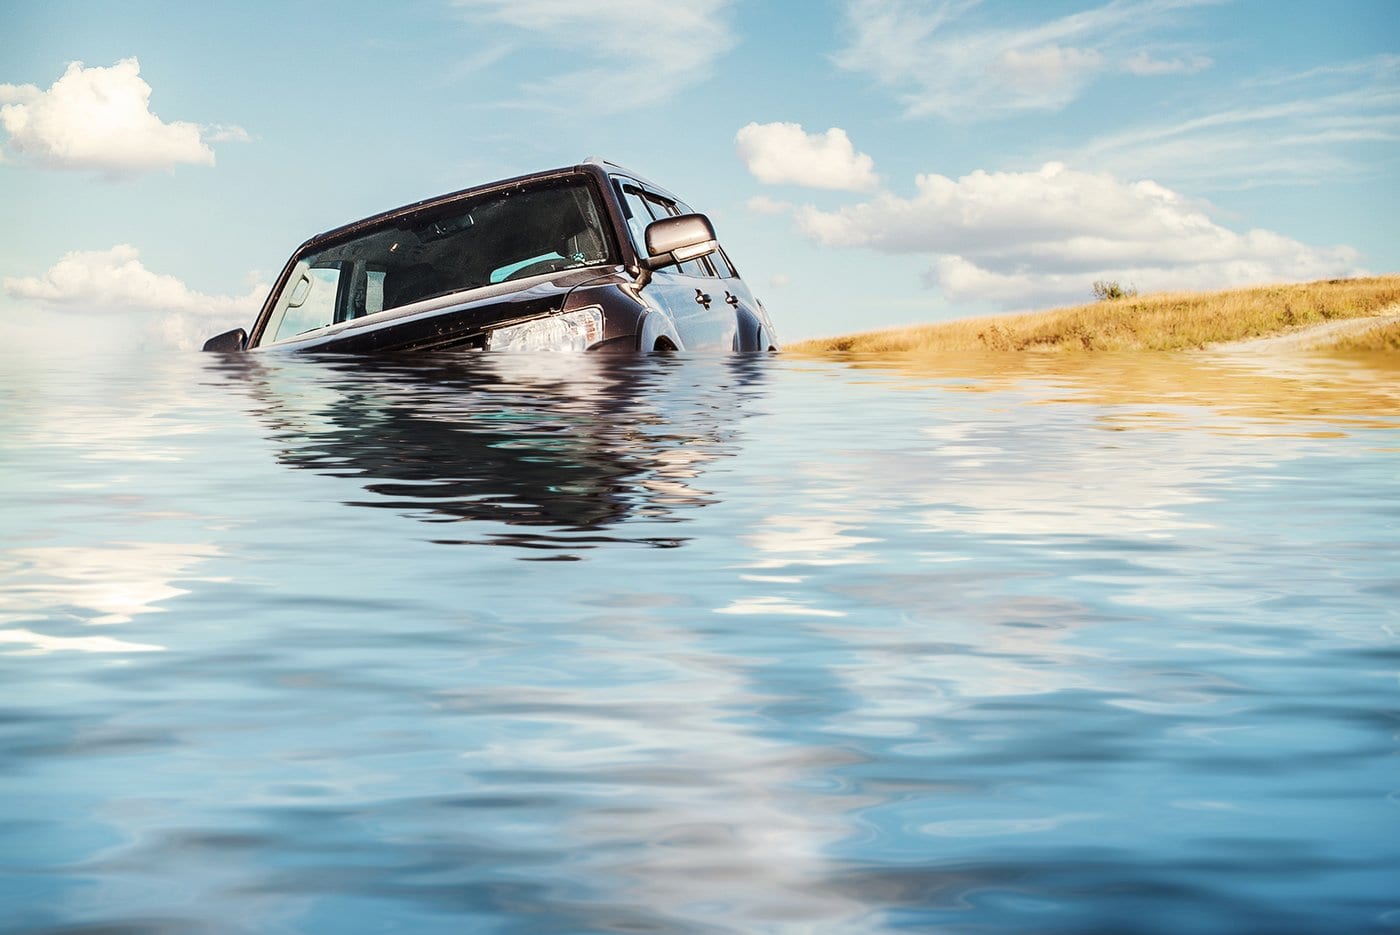 Know How to Escape from a Sinking Car